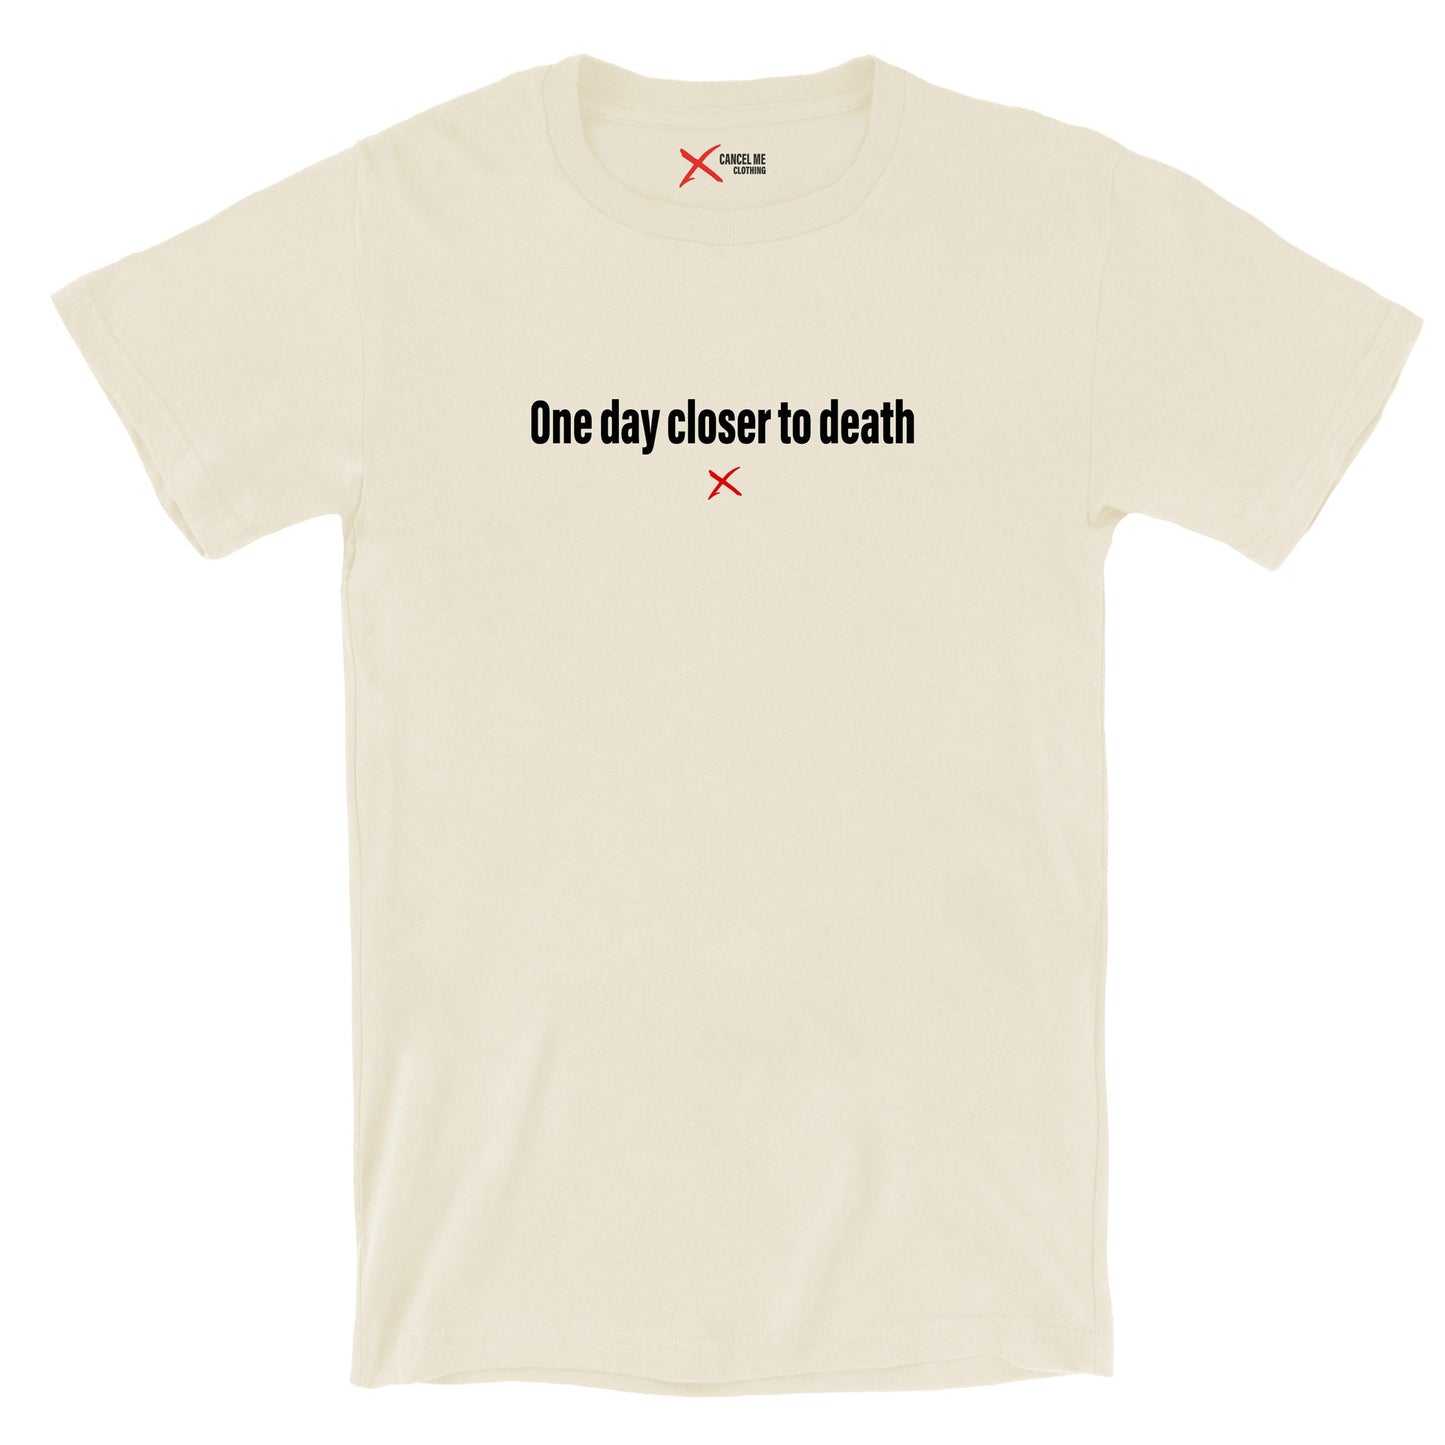 One day closer to death - Shirt